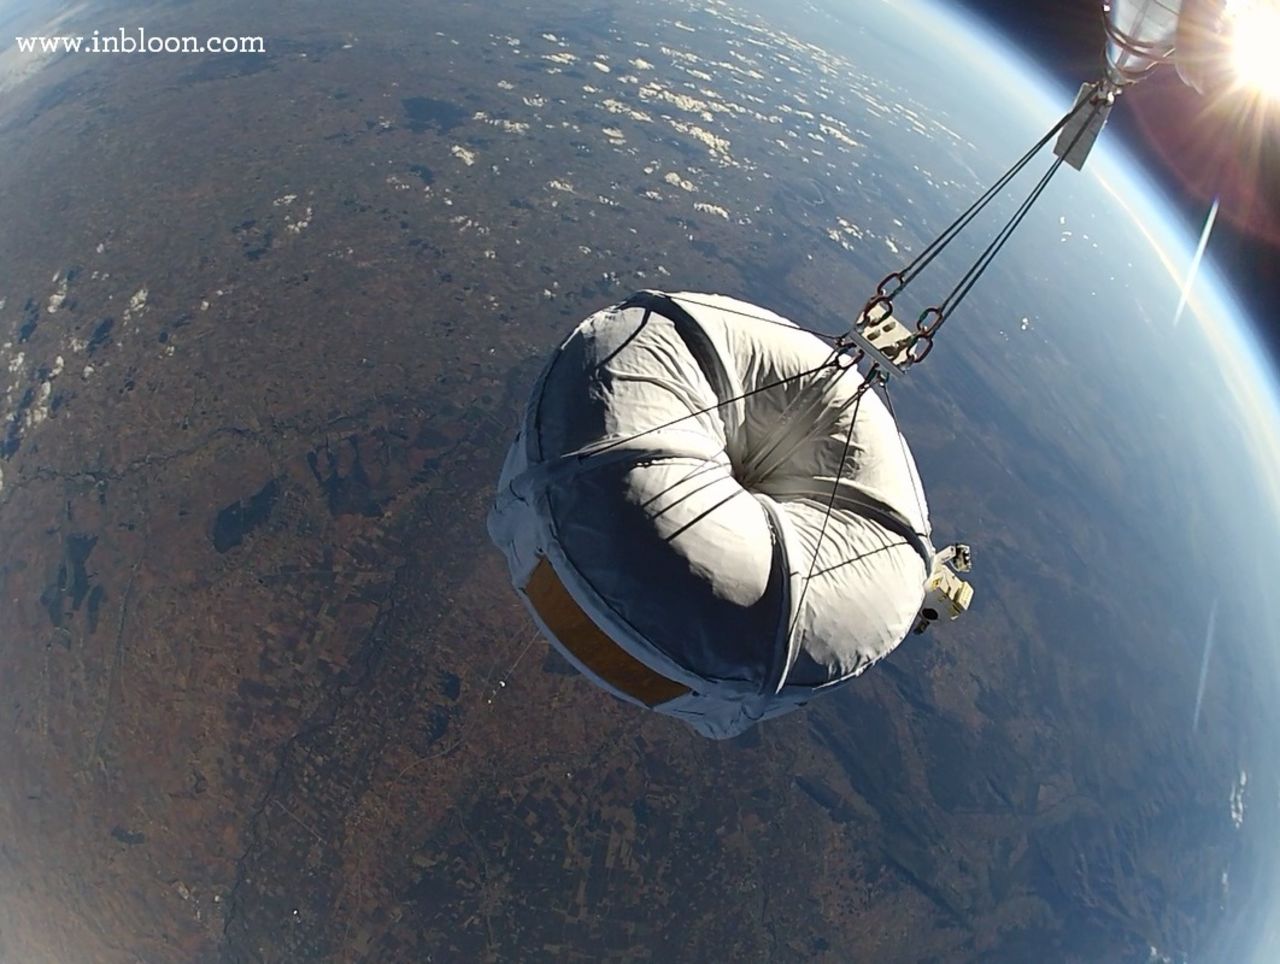 A "Micro Bloon" spherical capsule on a test flight, far above the Earth.